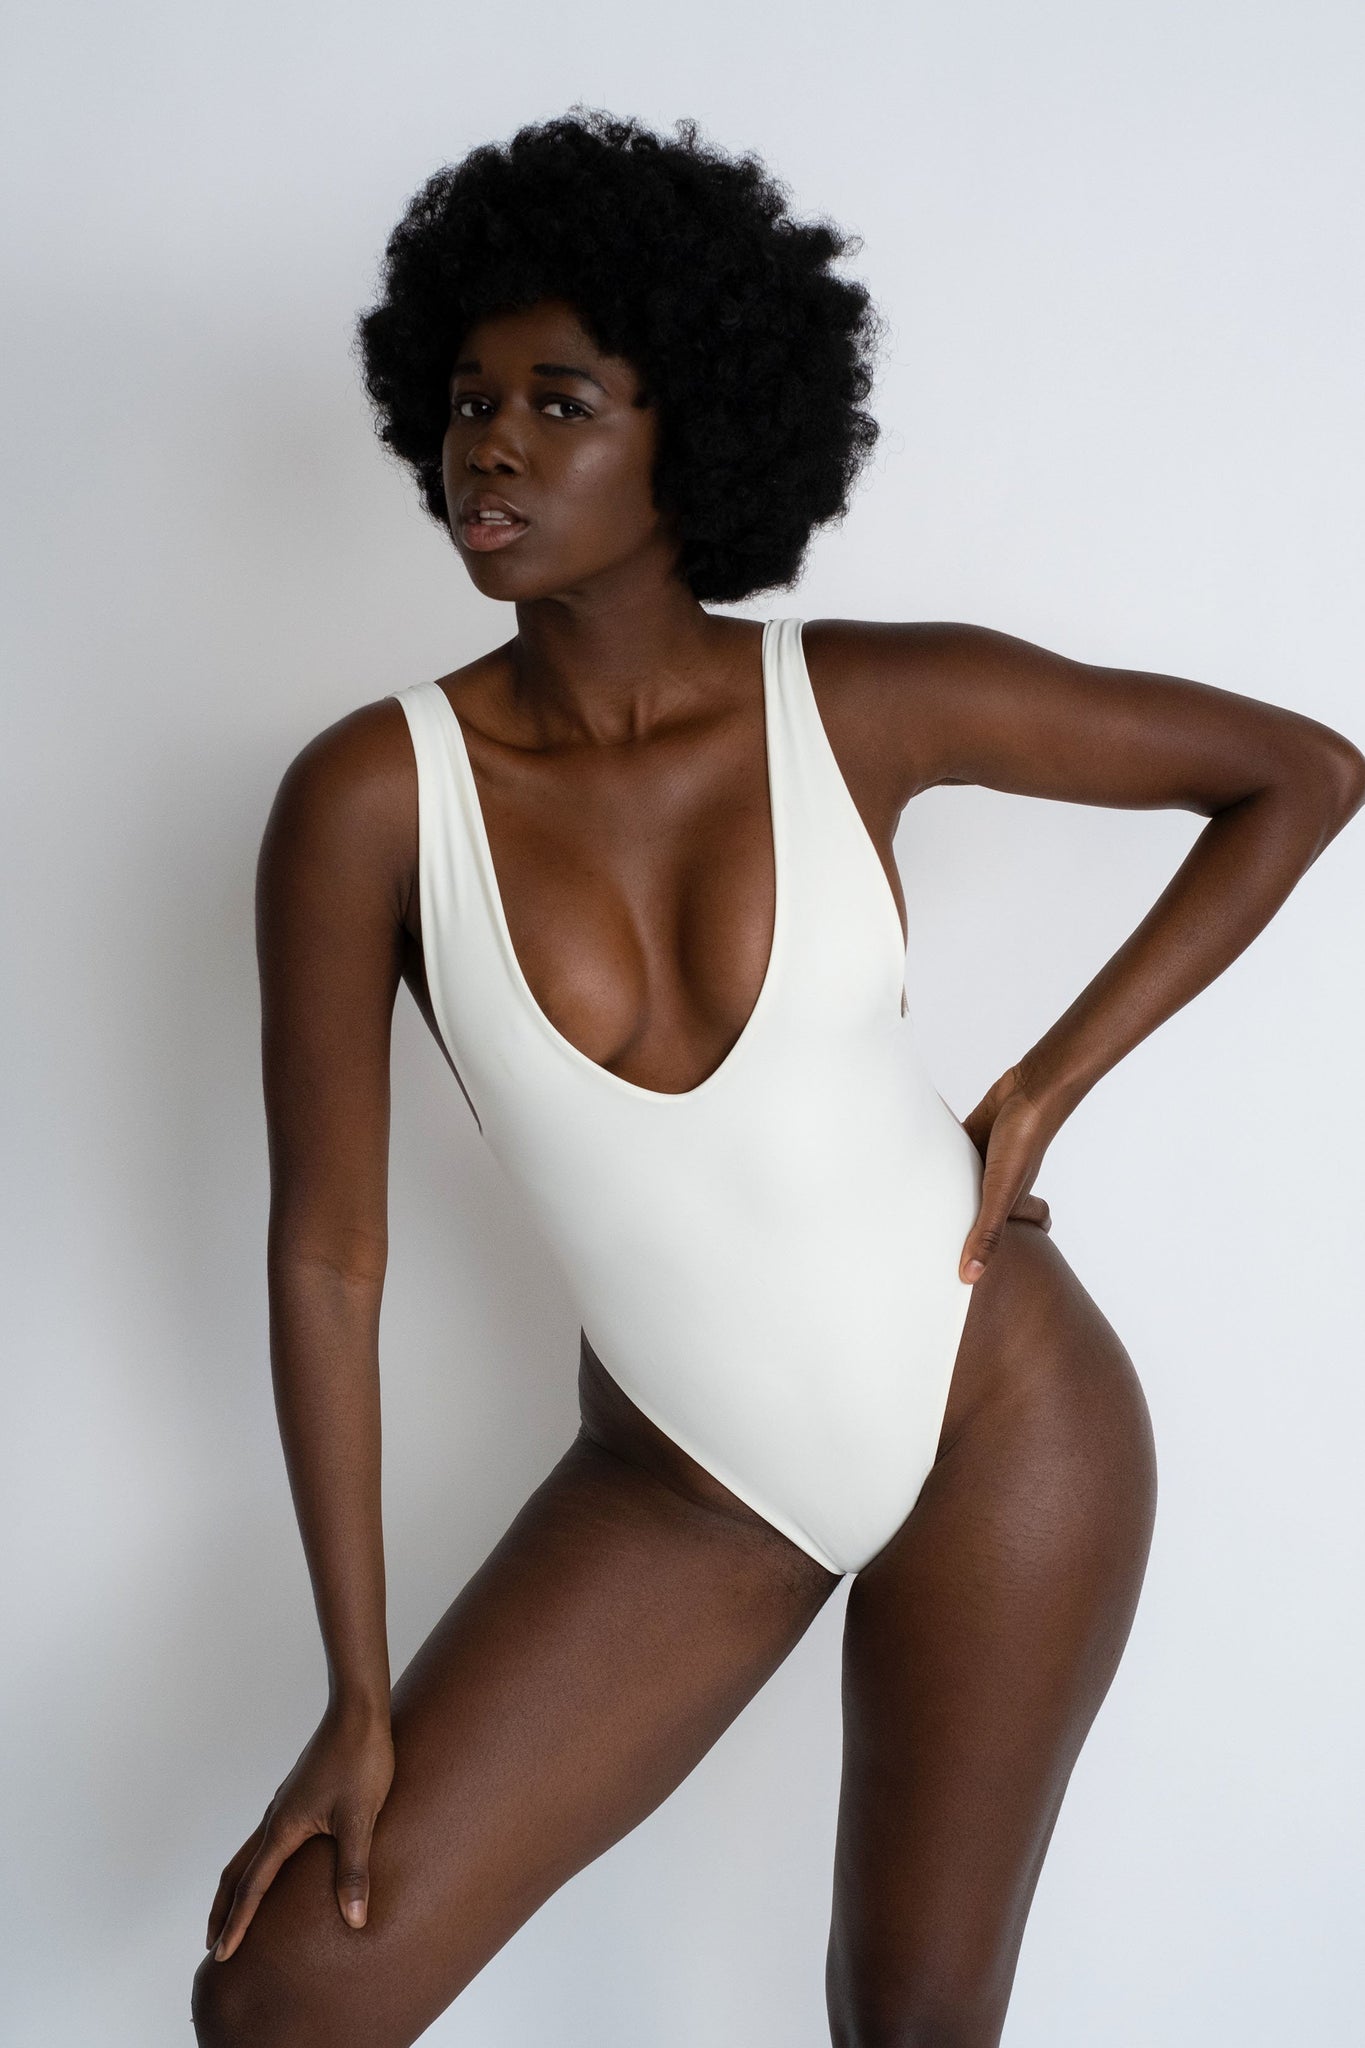 A woman standing with one hand on her hip wearing a white one piece swimsuit with a deep v neckline and minimal coverage.